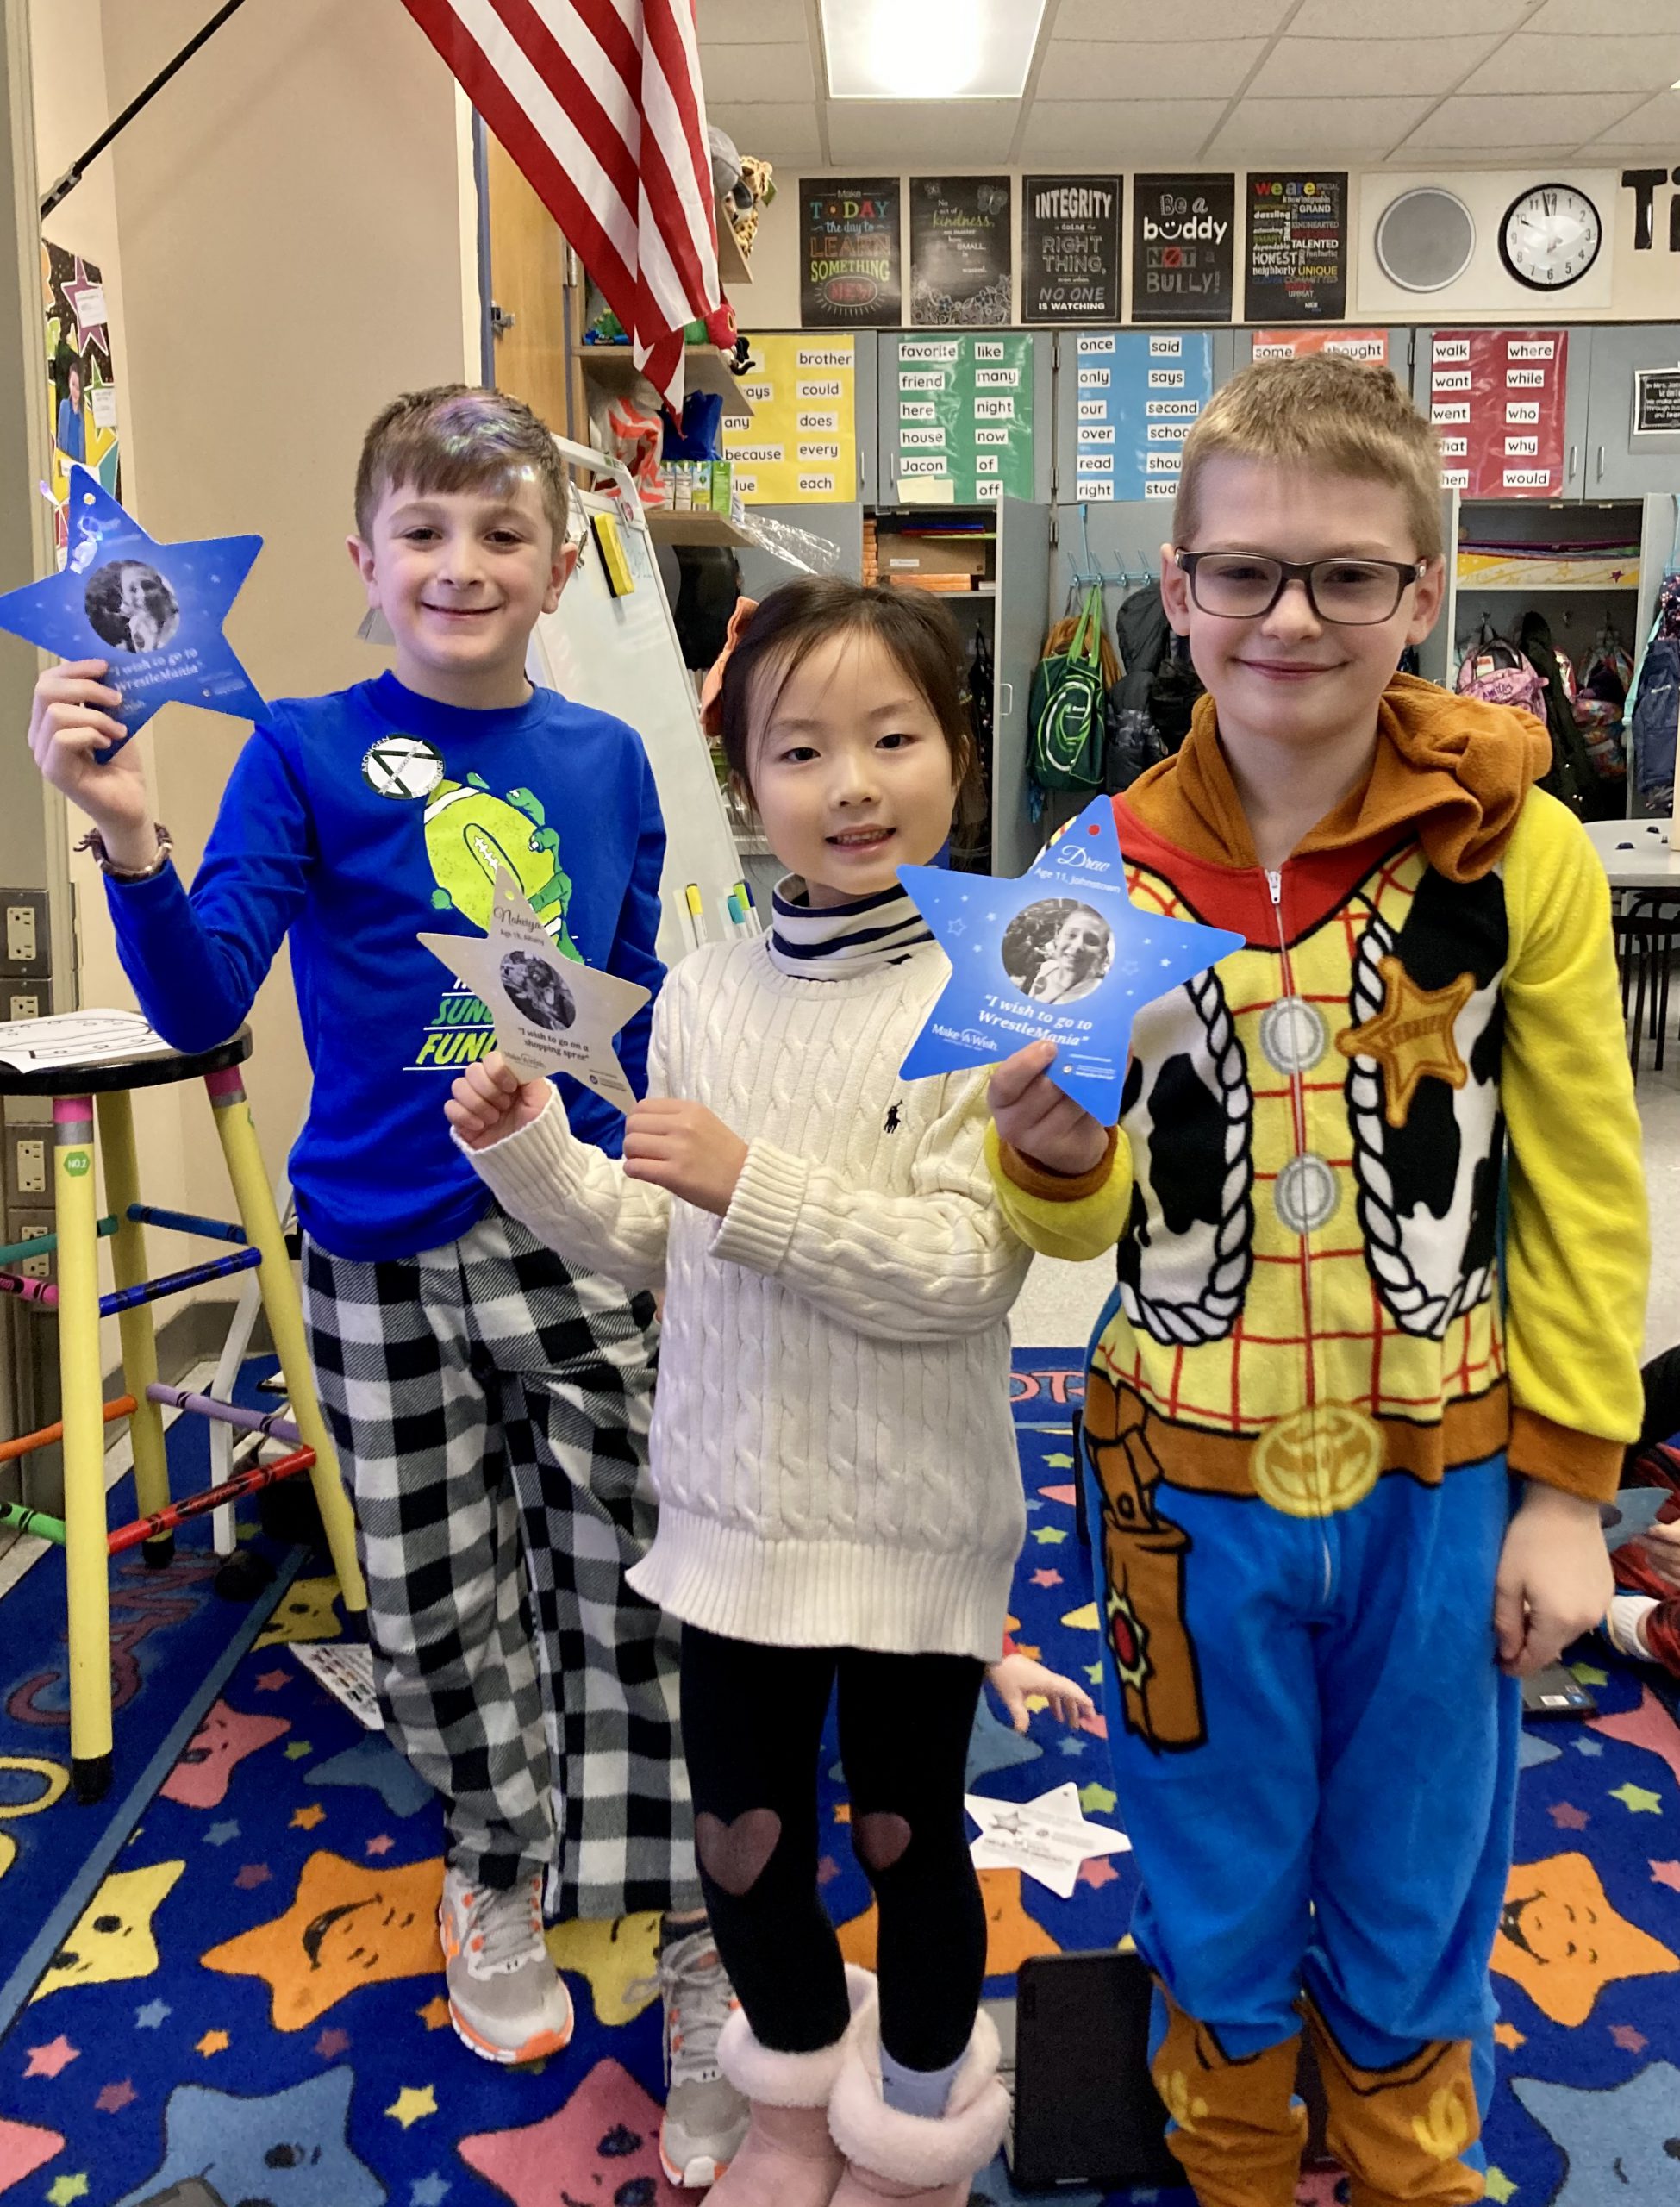 Arongen second graders in Mrs. Jacon’s class made ornaments to raise money to adopt two endangered animals as well as donate to local charities and the Make-A-Wish Foundation. The students  learned that giving back is so important and one person (or one class community) can make a difference.